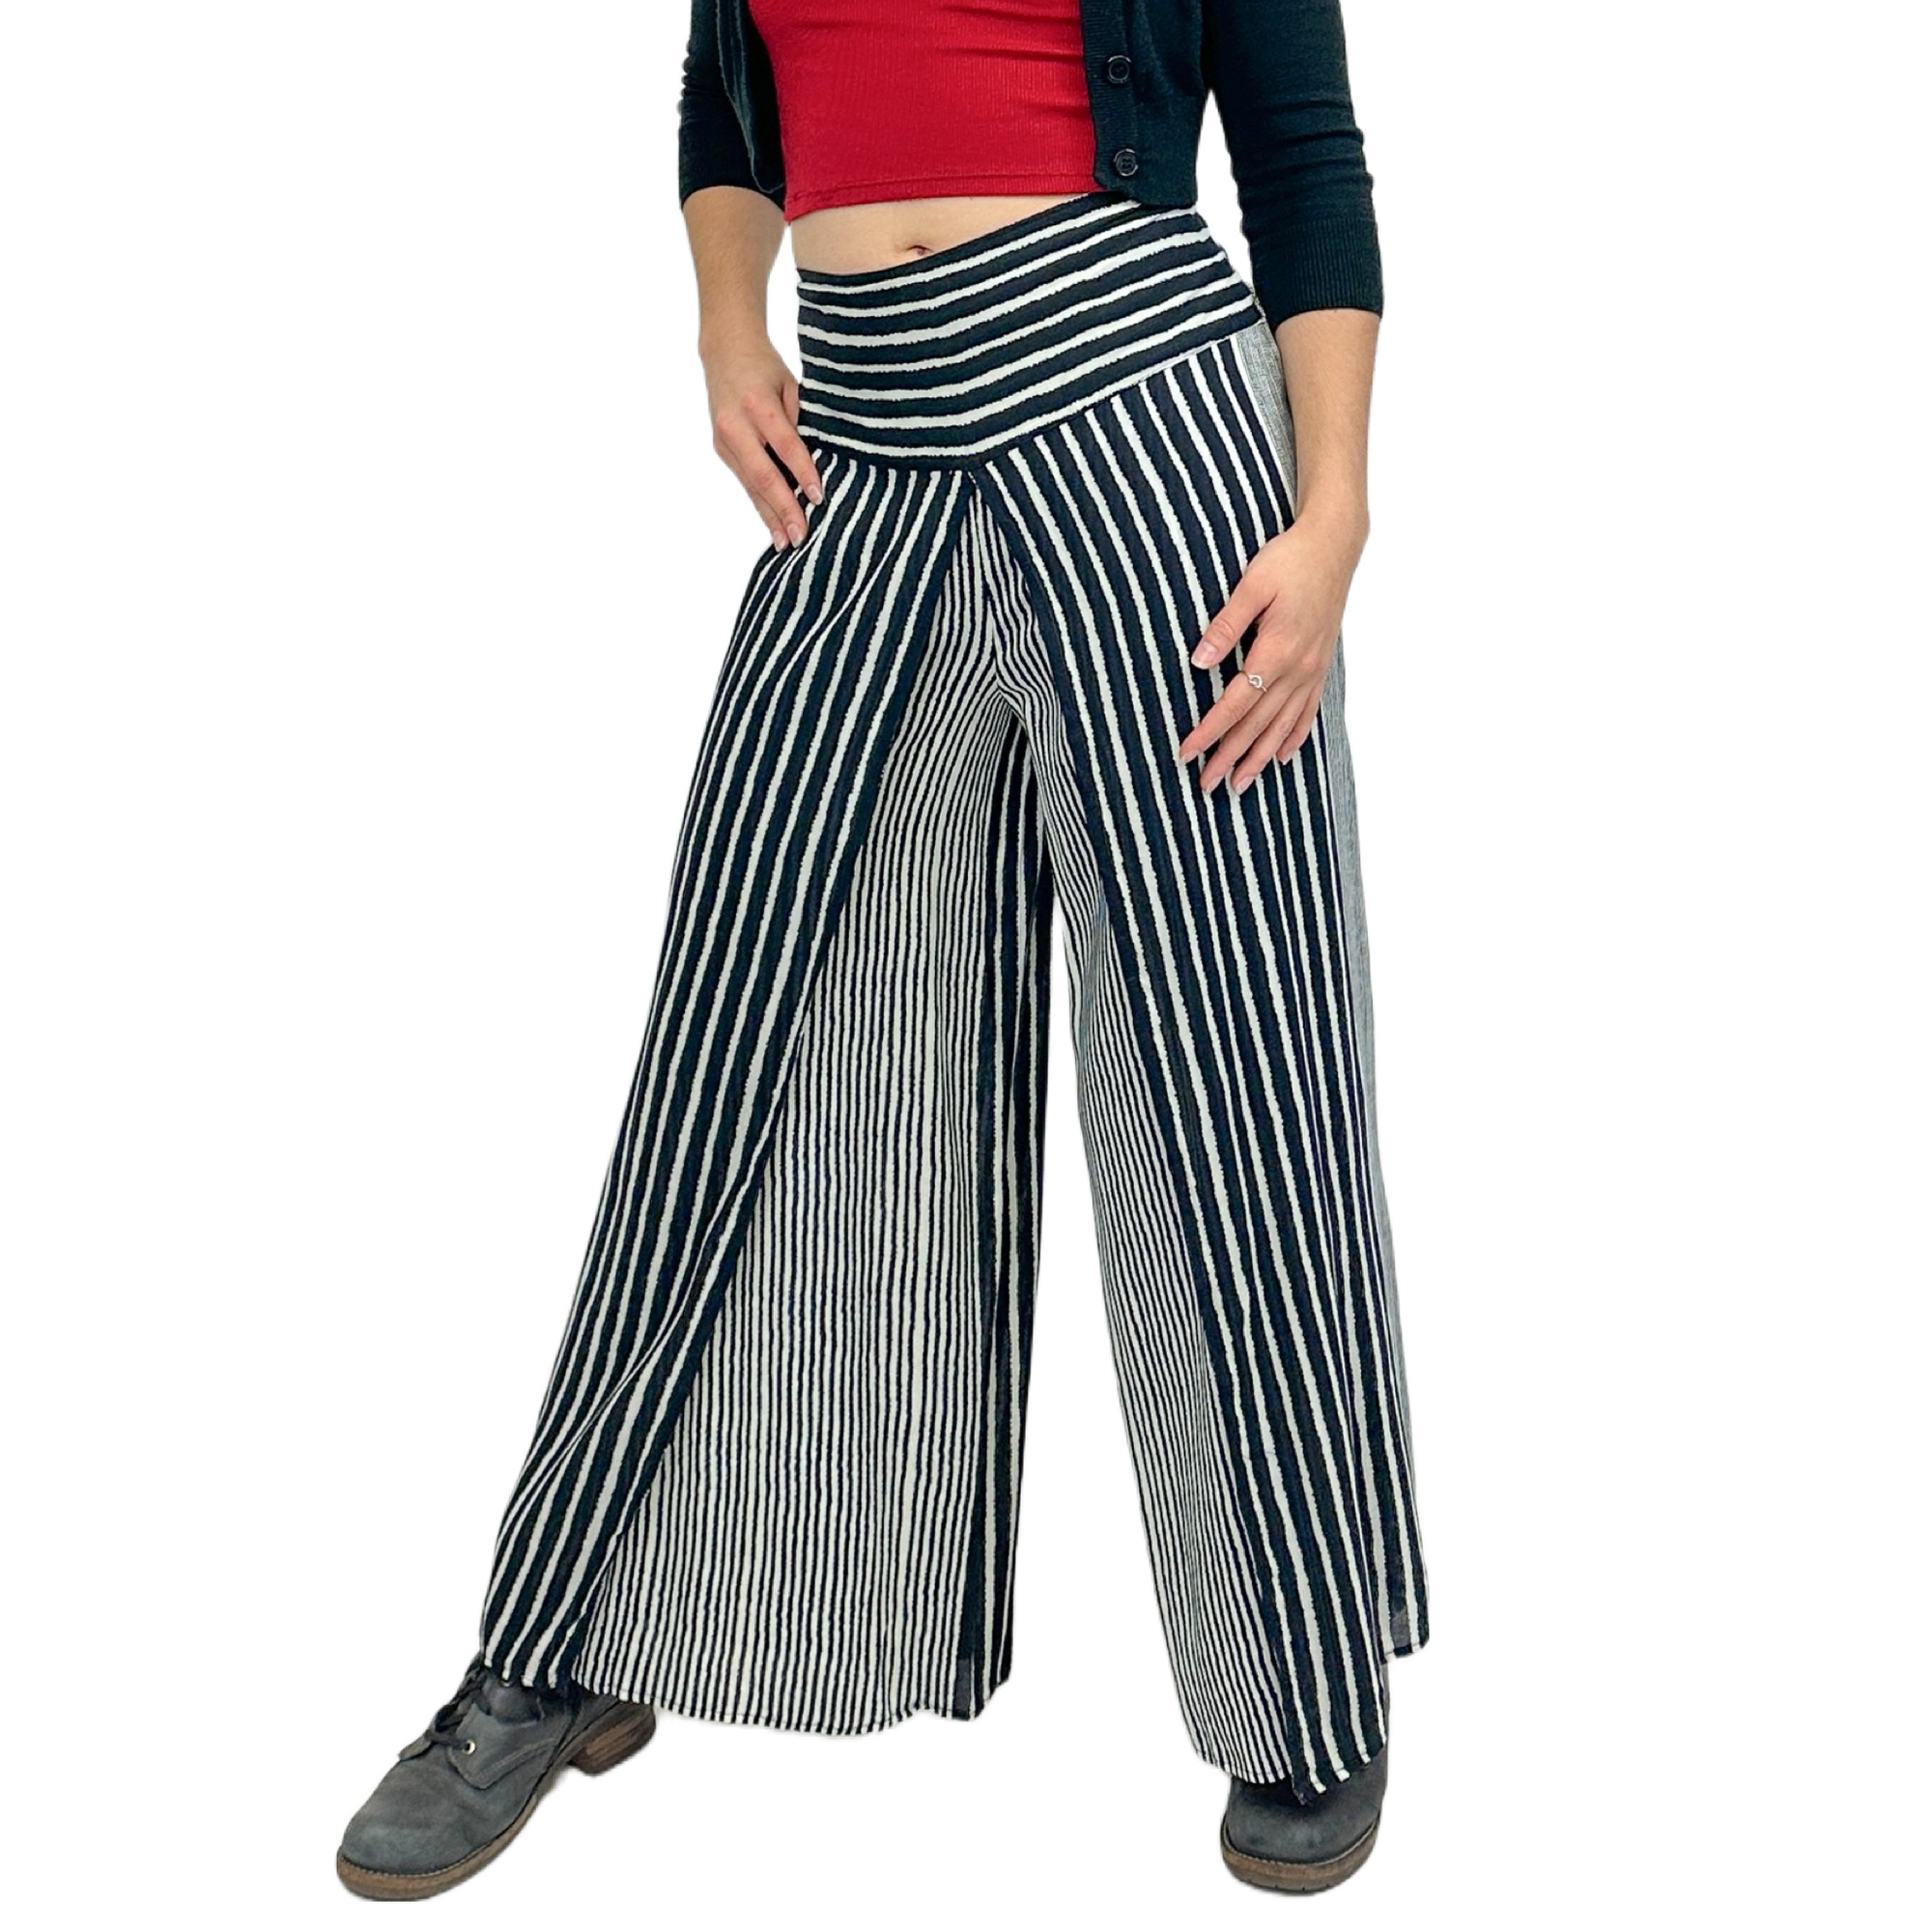 black and white beach pants for women | ideal for hot summer days! | no pockets - wrap style design 